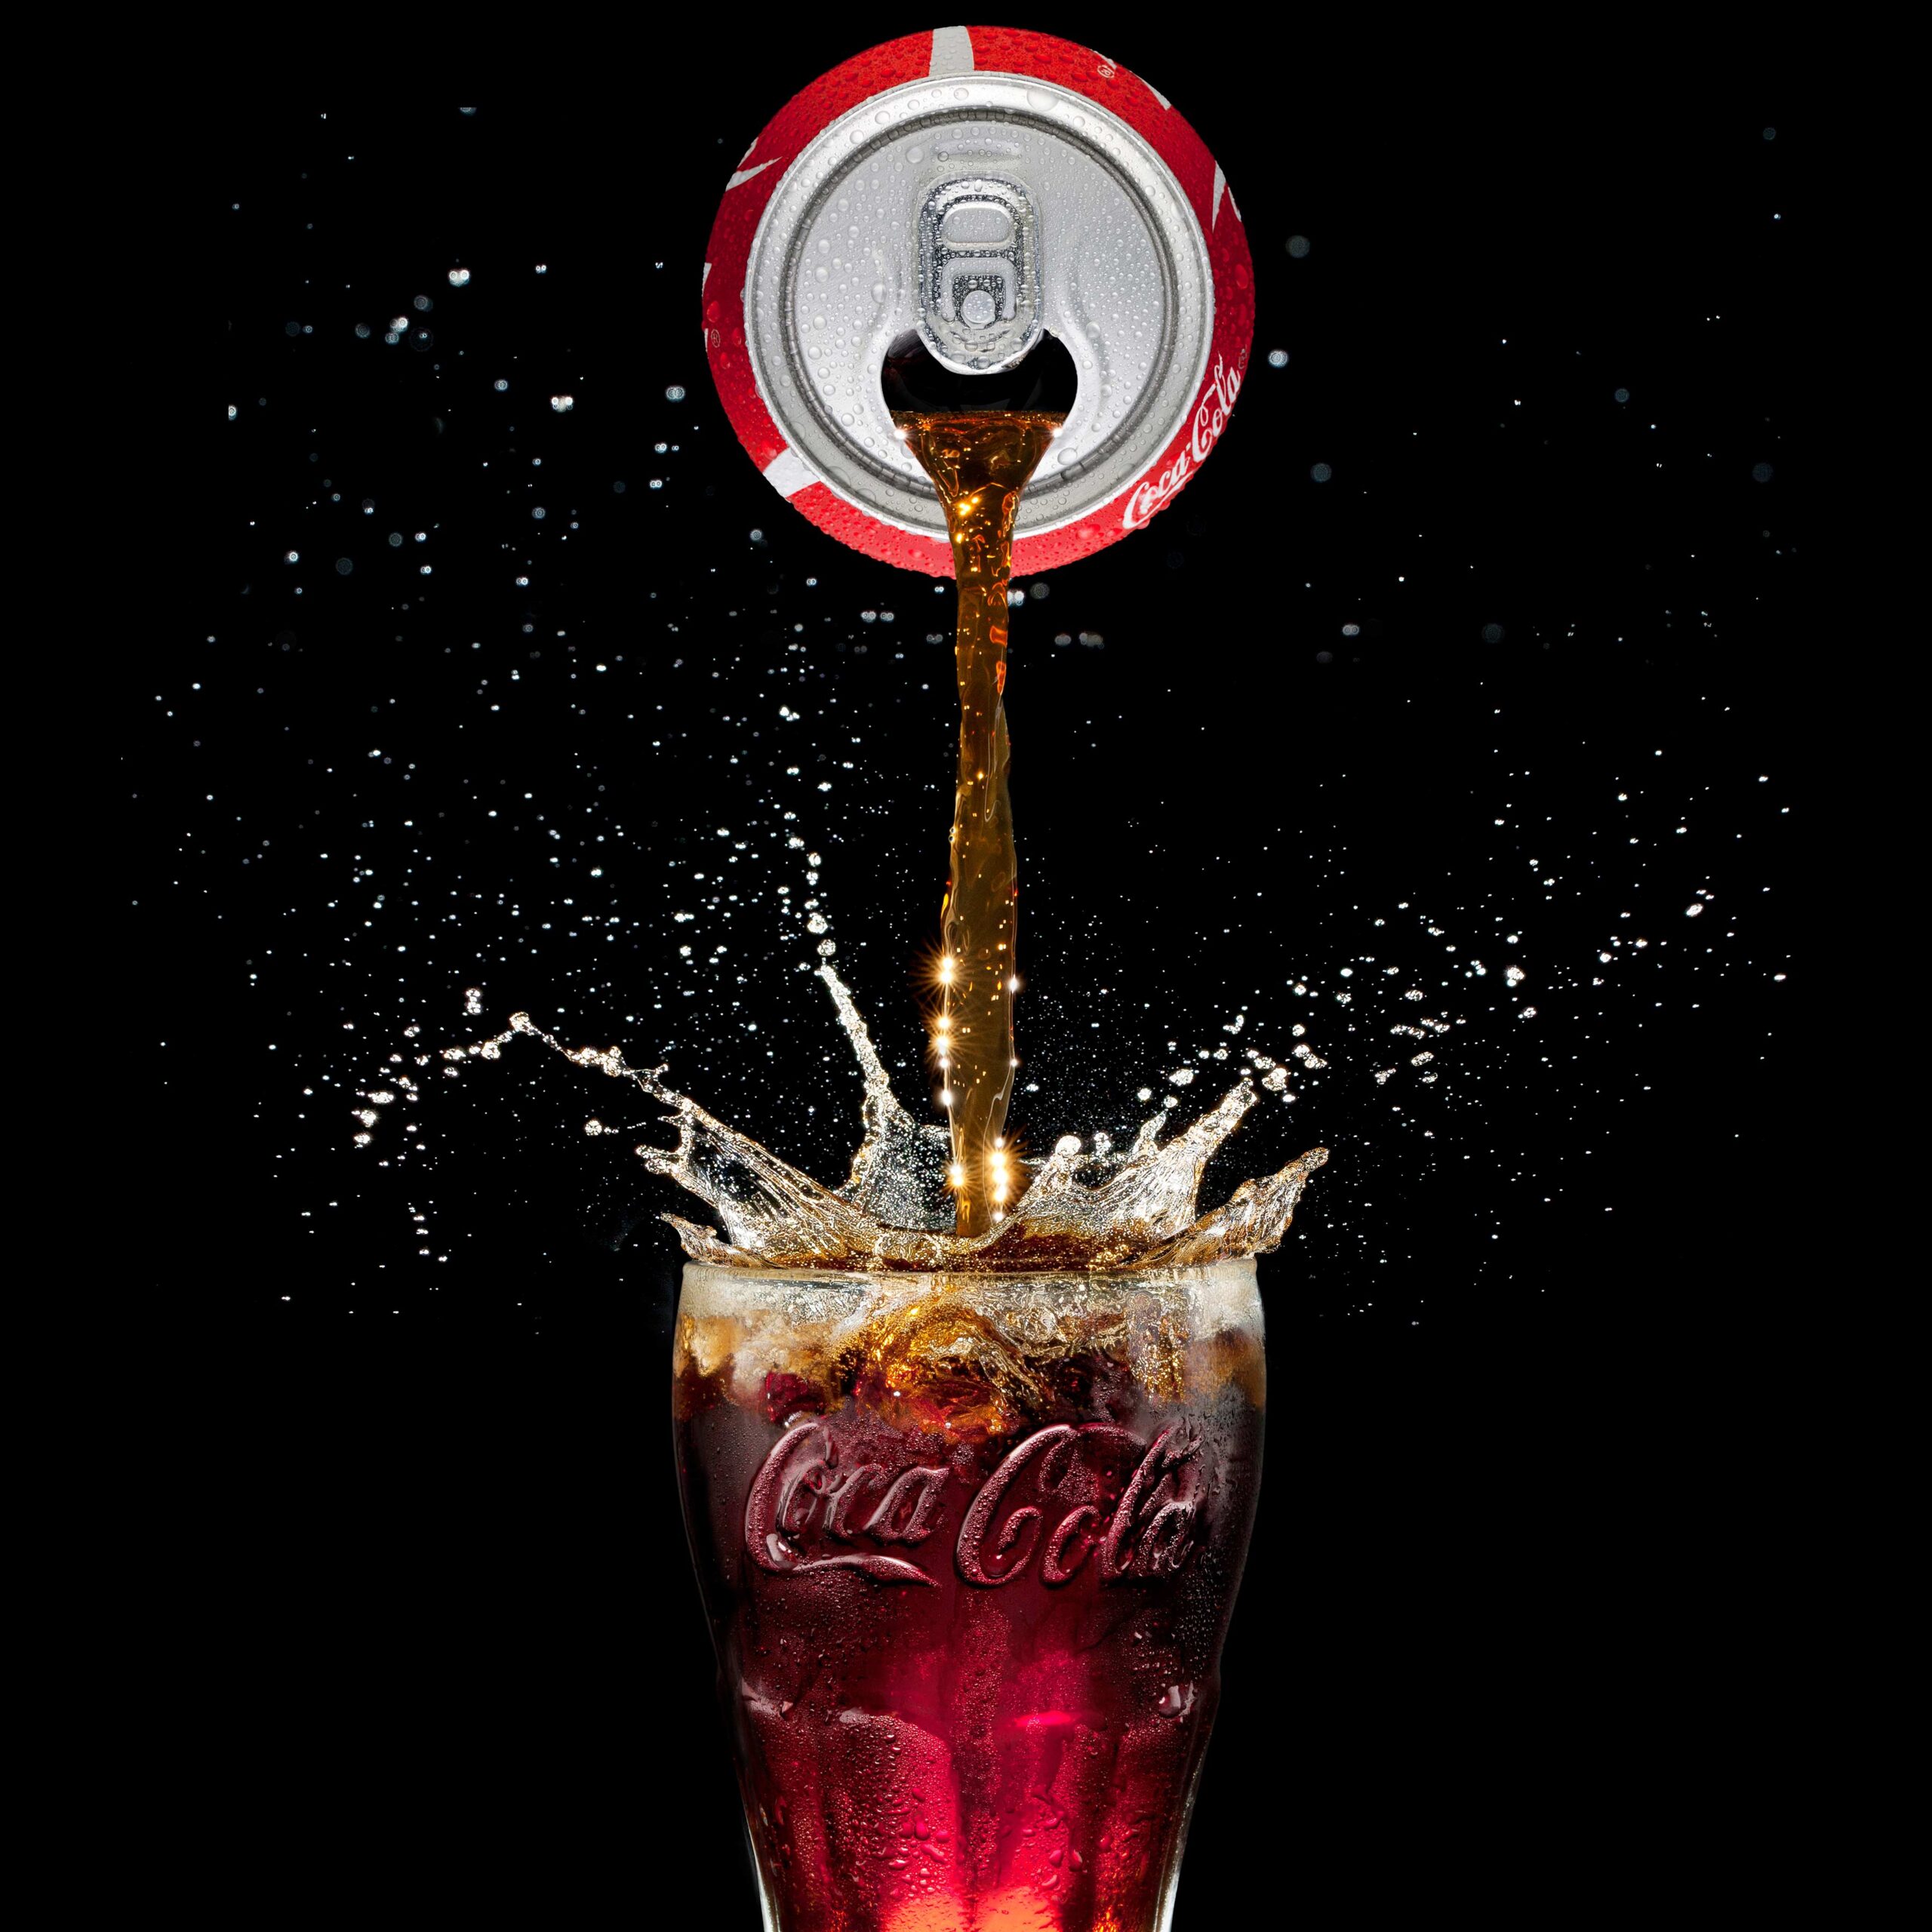 Product Photography of a Coca-Cola can be ported to a glass with epic splashes of water, making it look high-quality and luxury